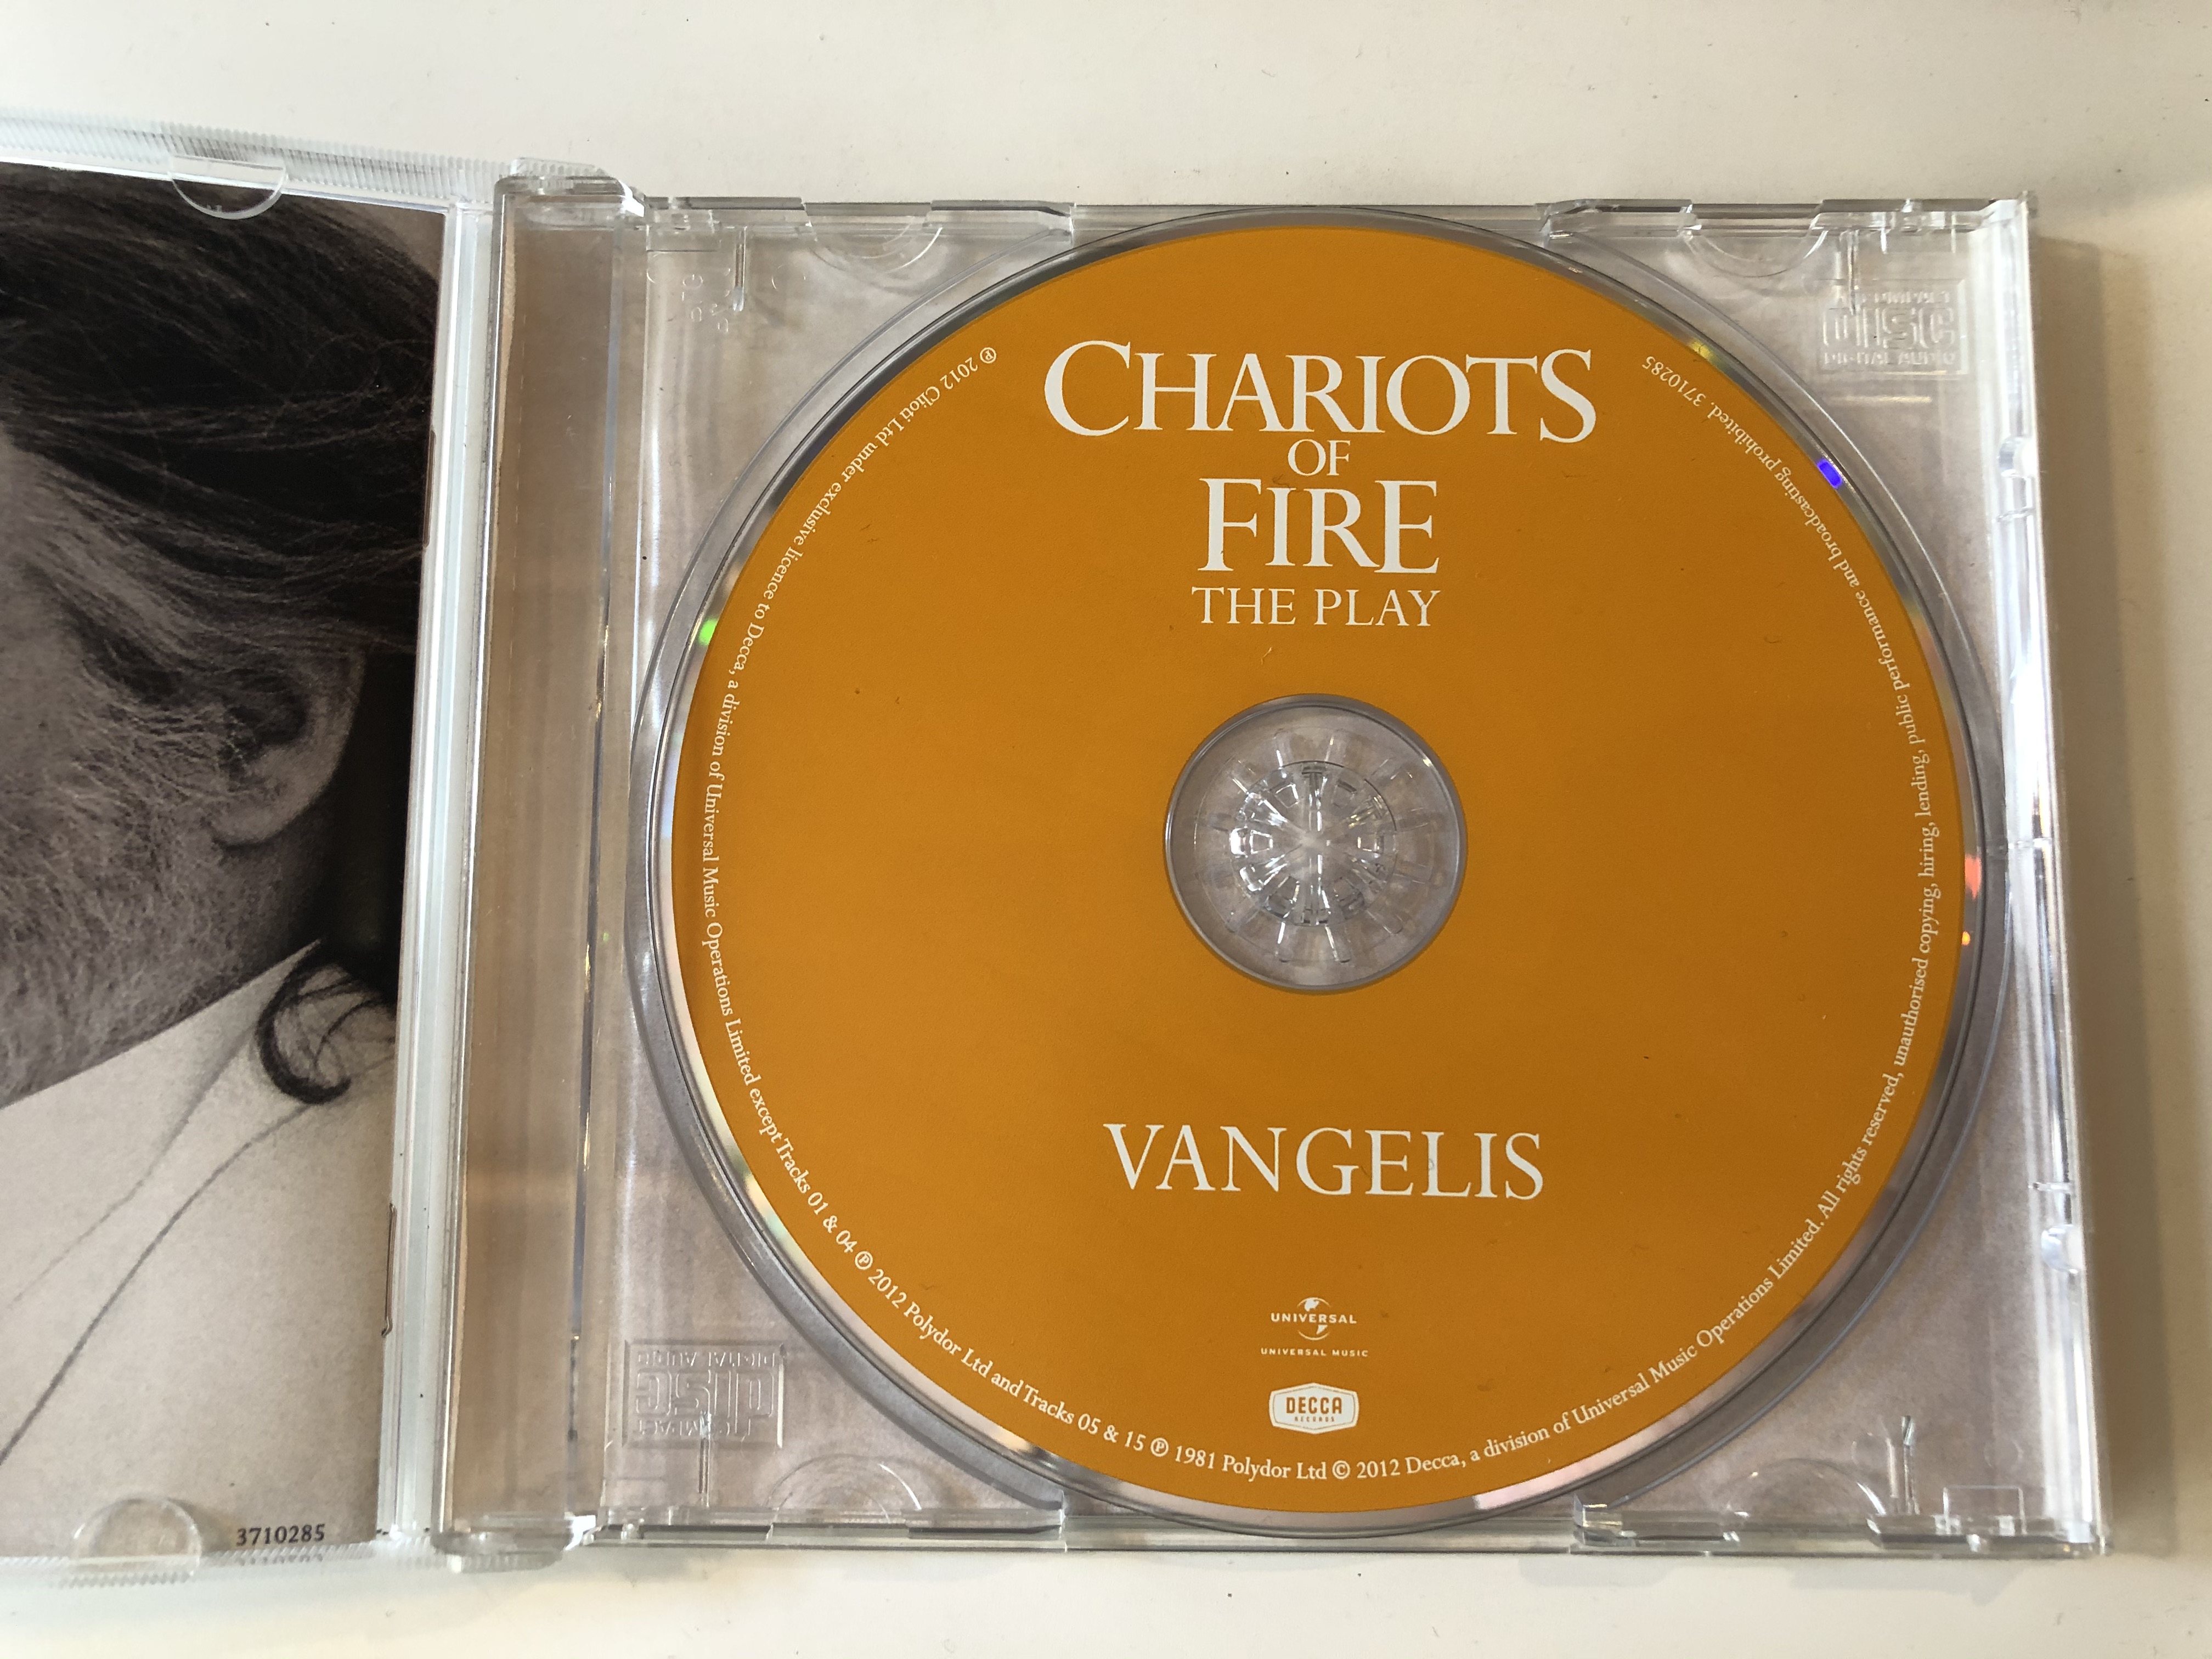 vangelis-chariots-of-fire-the-play-music-from-the-stage-show-featuring-the-iconic-original-score-and-new-music-by-vangelis-decca-audio-cd-2012-3710285-3-.jpg